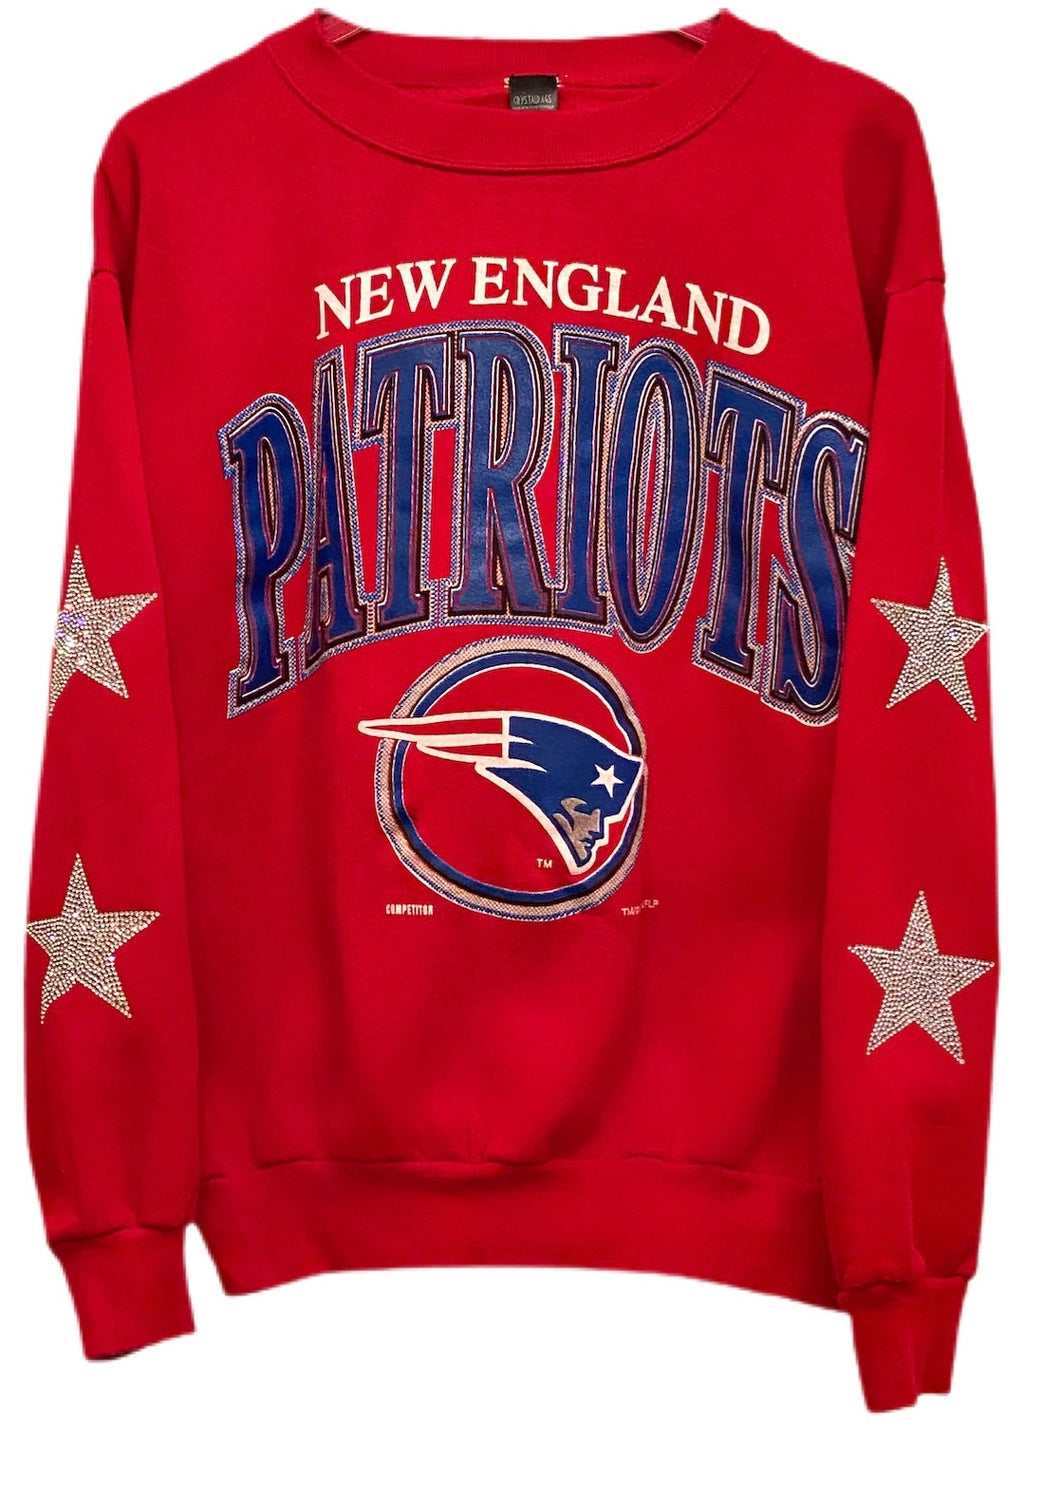 New England Patriots, NFL One of a KIND Vintage Sweatshirt with Crystal Star Design with Custom Crystal Name & #